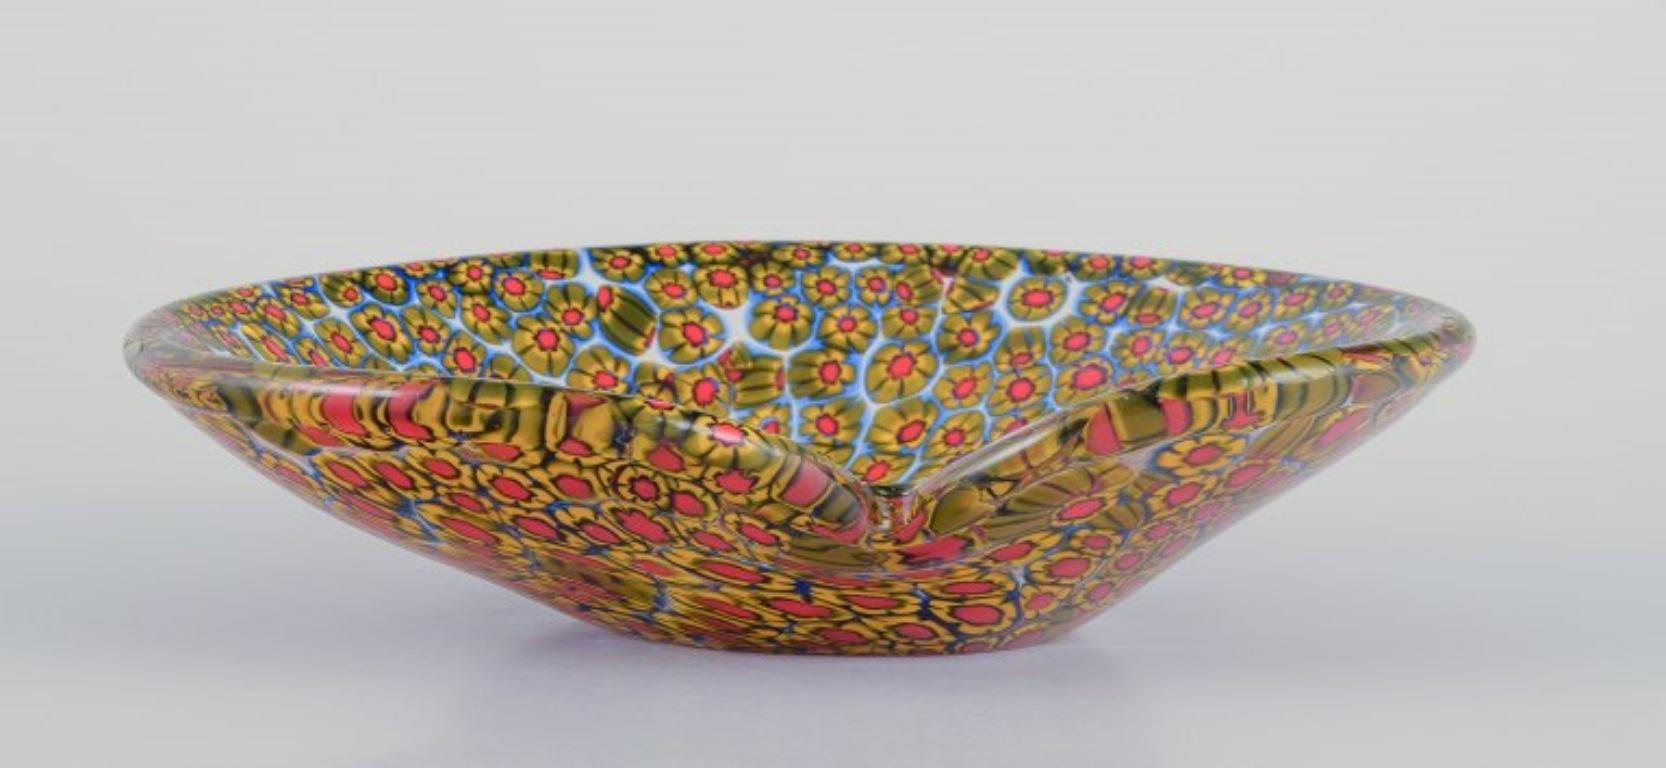 Murano, Italy. A millefiori art glass bowl.
From the 1970s.
Red, yellow, and blue tones.
In perfect condition.
Dimensions: L 15.8 cm x W 11.5 cm x H 3.2 cm.
The term millefiori is a combination of the Italian words 